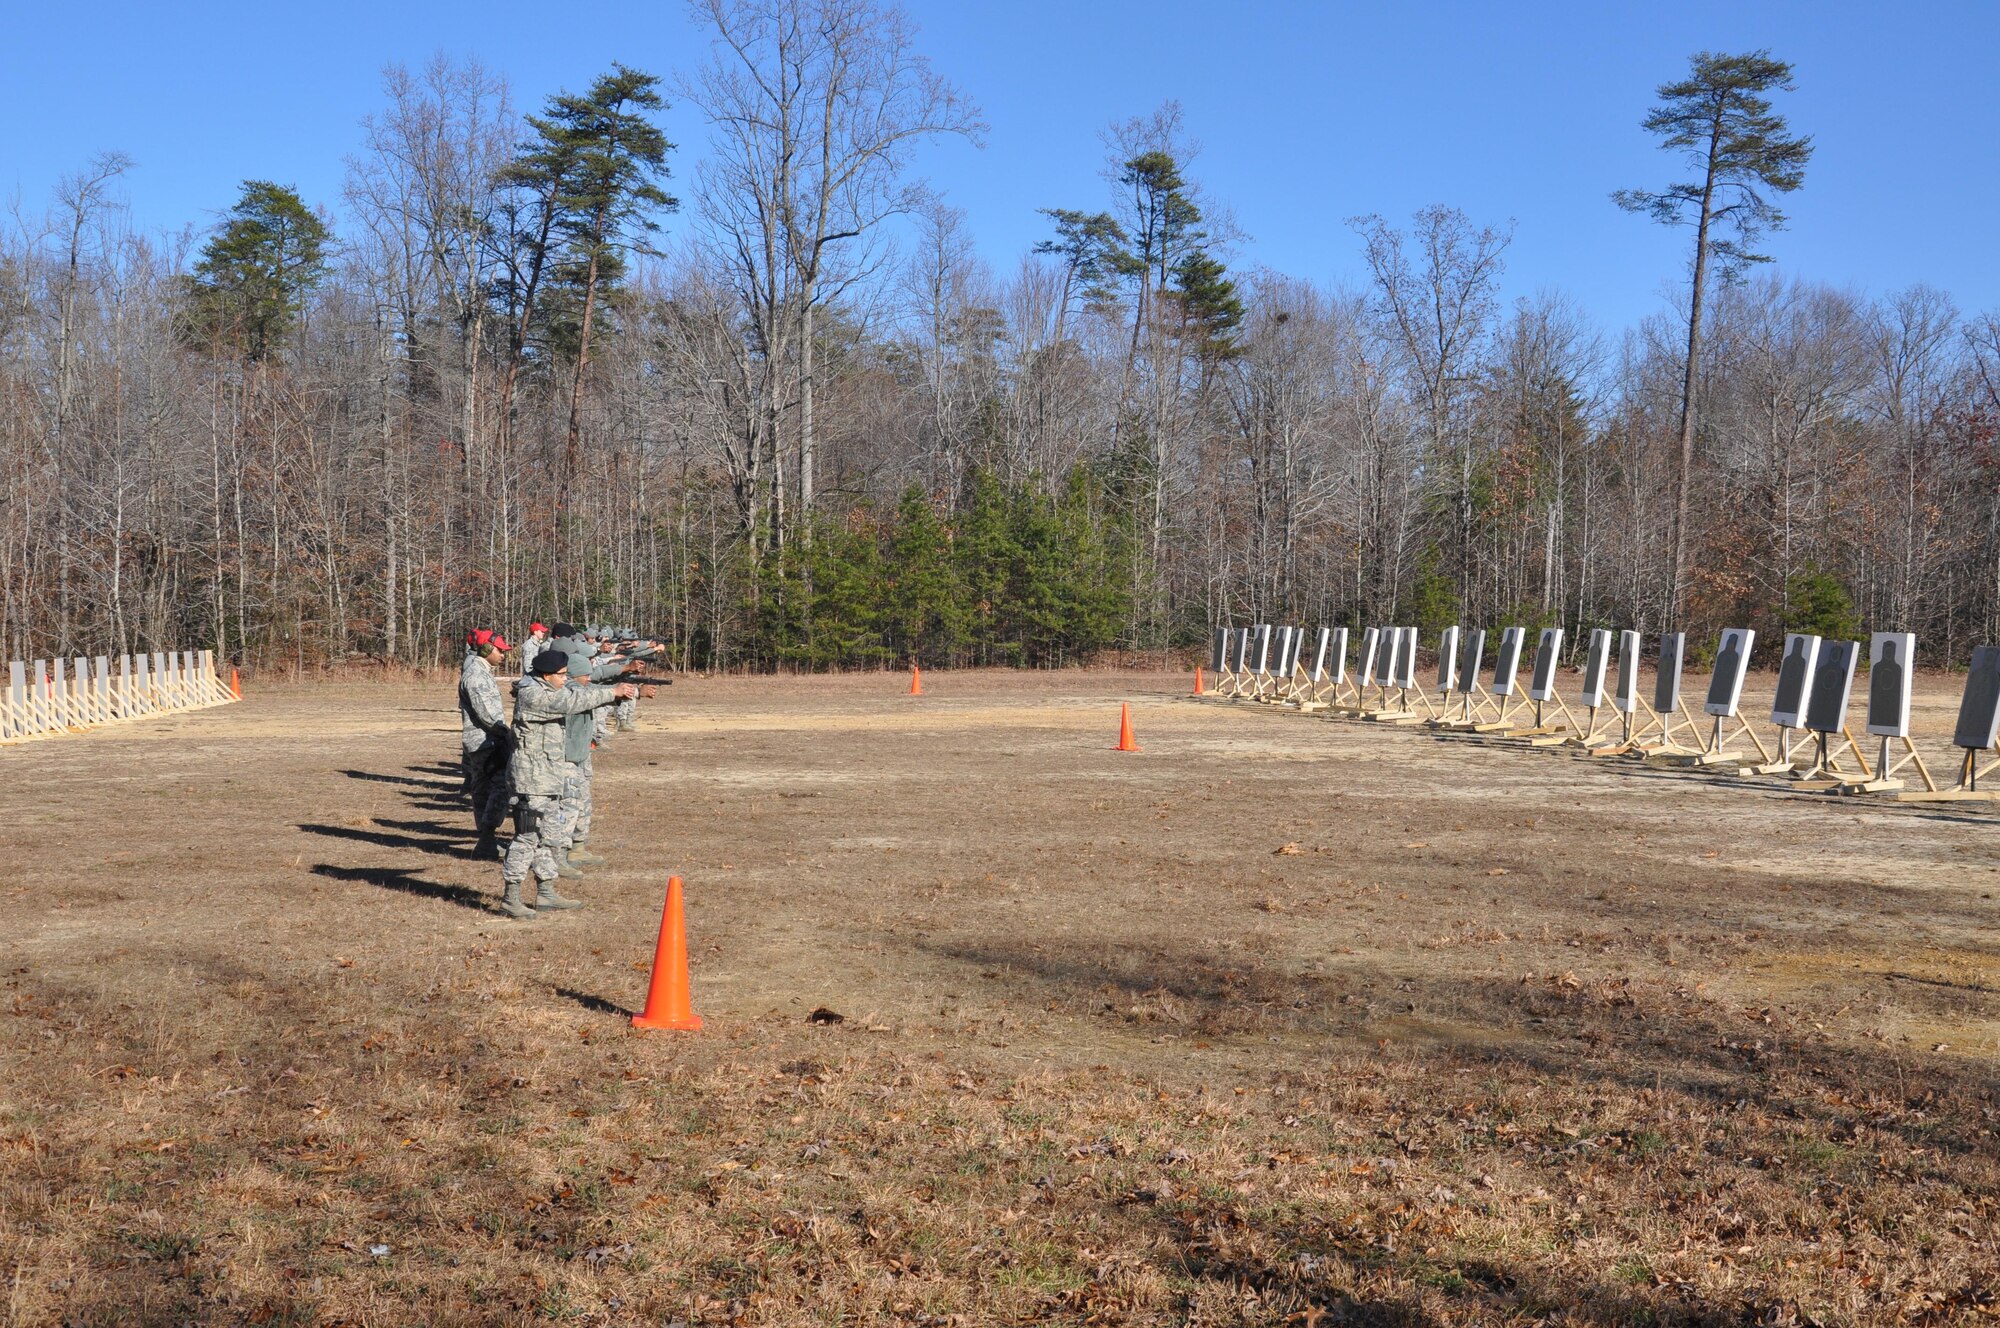 Members of the 459th Security Forces Squadron fire M9 handguns at targets at a Marine Corps Base Quantico, Virginia, firing range Dec. 3, 2016. More than 150 459th SFS members traveled from Joint Base Andrews, Maryland, to Quantico to train on the M4 assault rifle and M9 handgun. (U.S. Air Force photo/Senior Airman Kristin Kurtz)